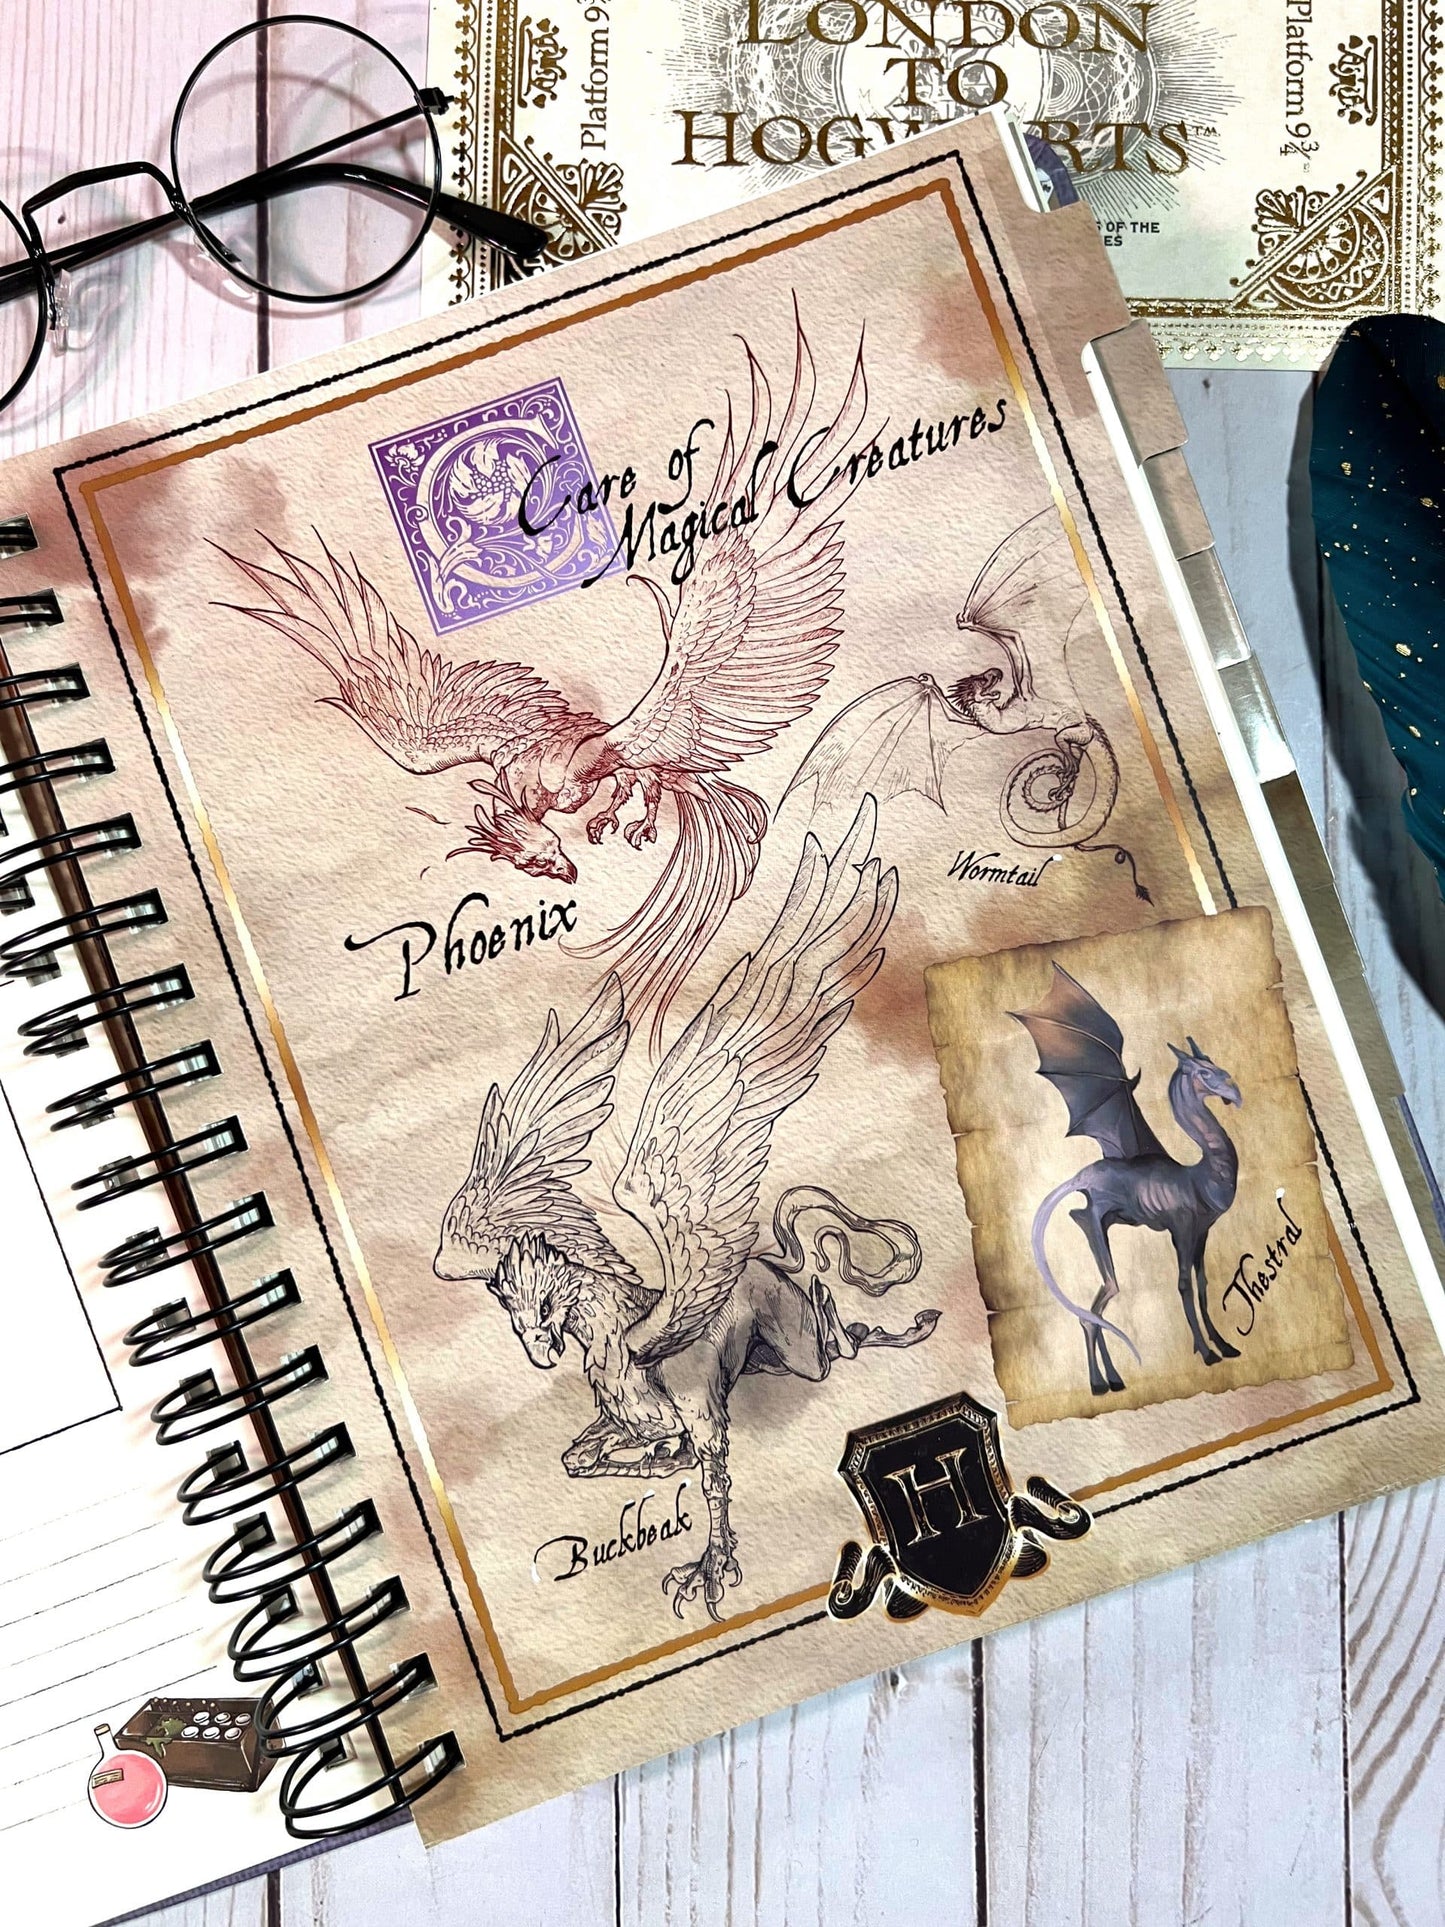 Harry Potter Time is of the Essence Spiral Undated Weekly Planner